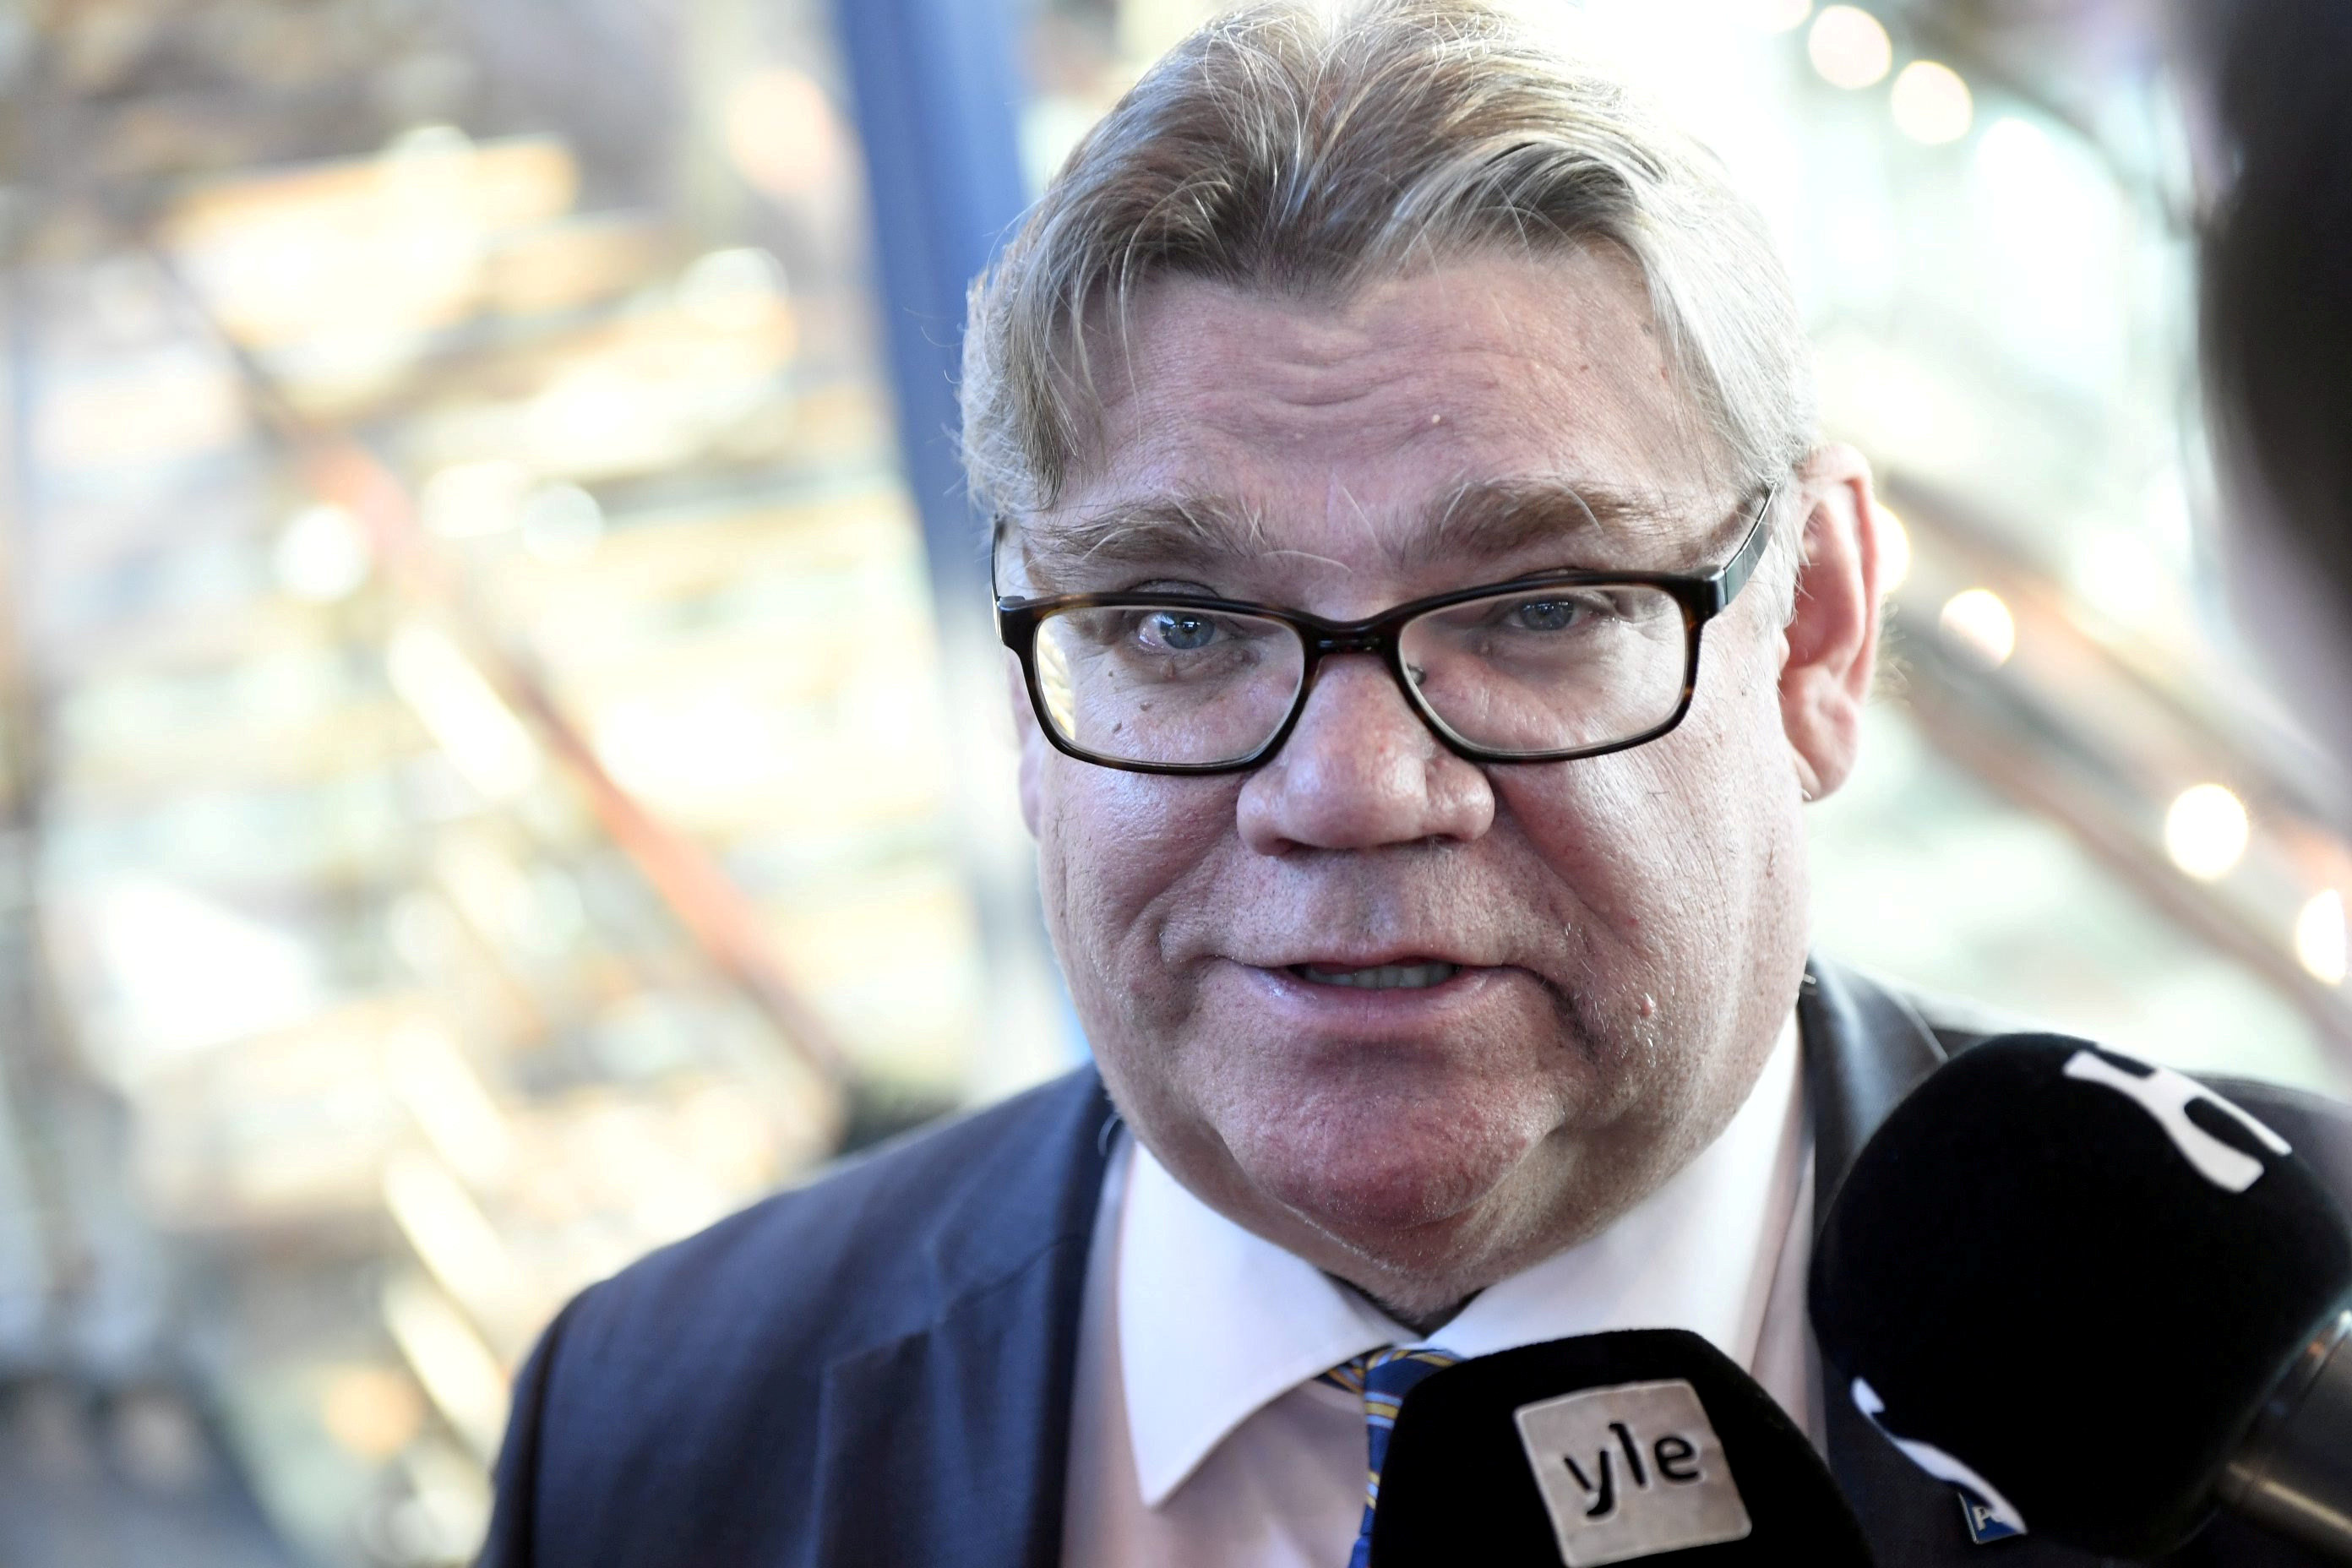 Finnish Prime Minister Timo Soini, leader of Finland's populist Finns Party for two decades, gives a press conference at the Helsinki International airport in Vantaa, Finland, on March 5, 2017. (Lehtikuva / Vesa Moilanen / via Reuters / File Photo)